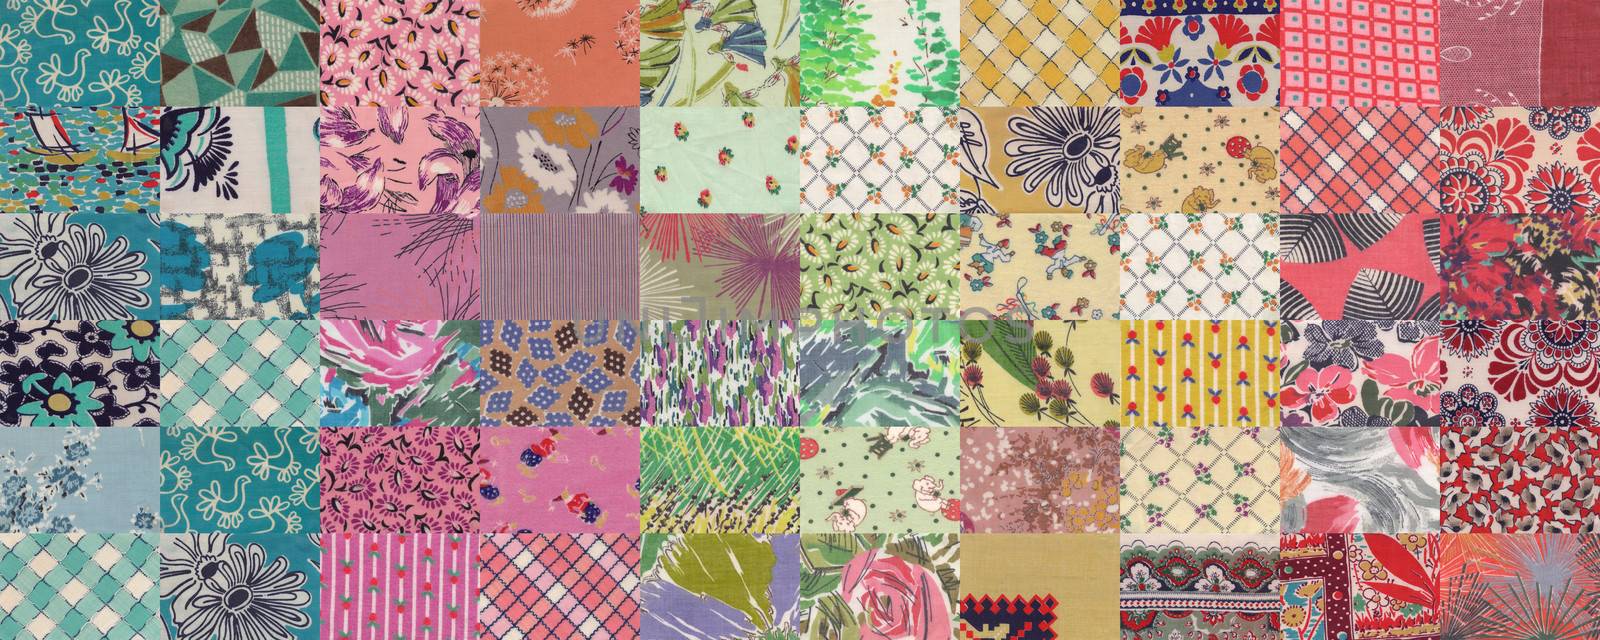 quilt color background by vergasova